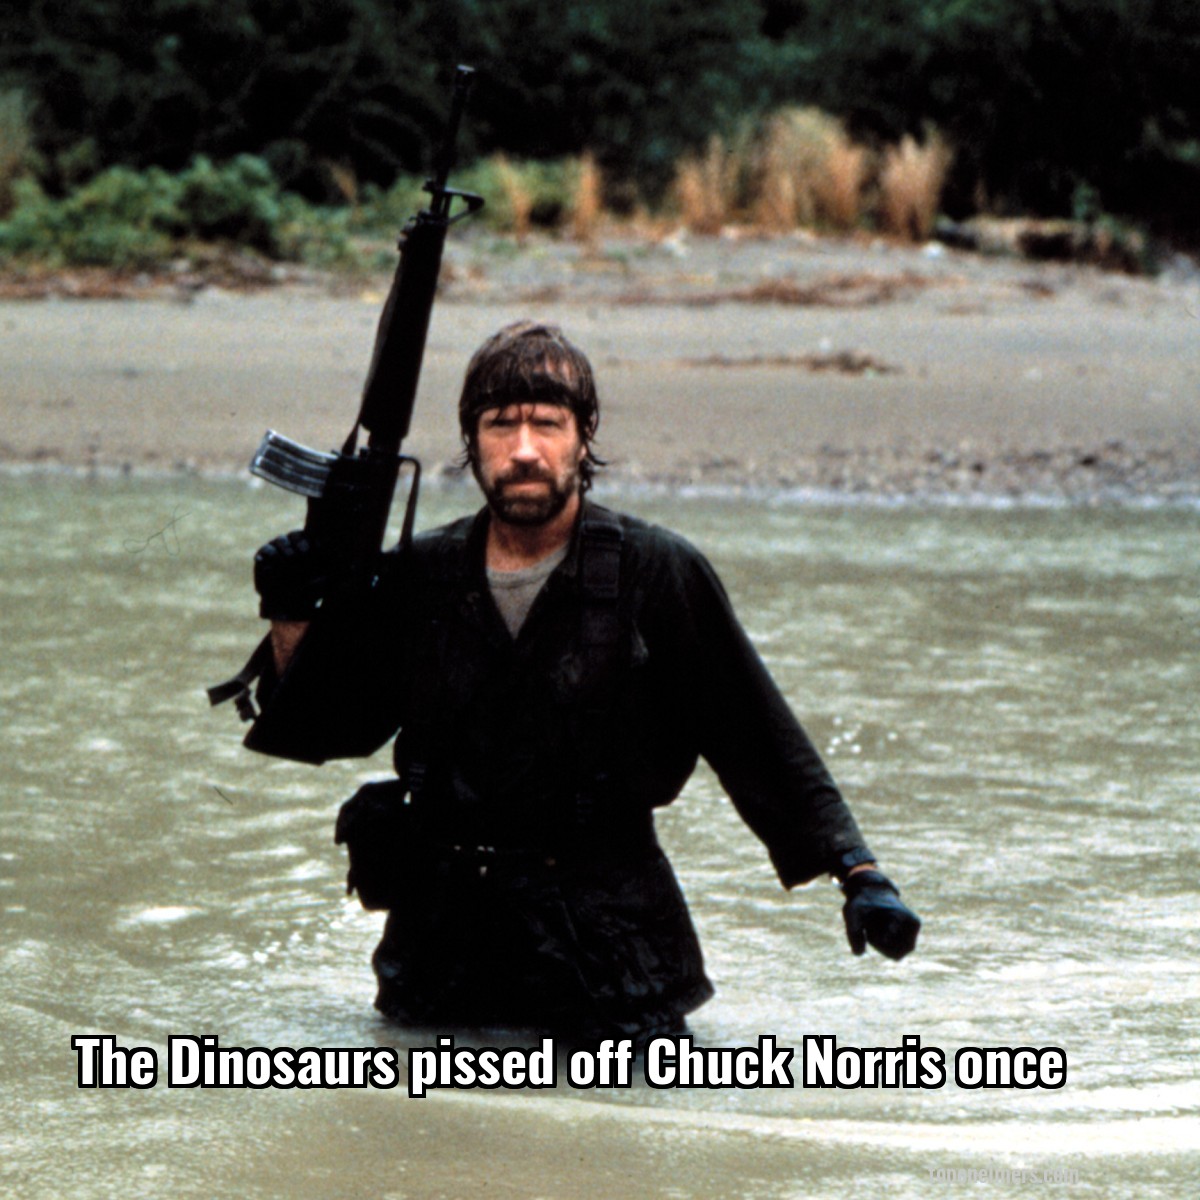 The Dinosaurs pissed off Chuck Norris once